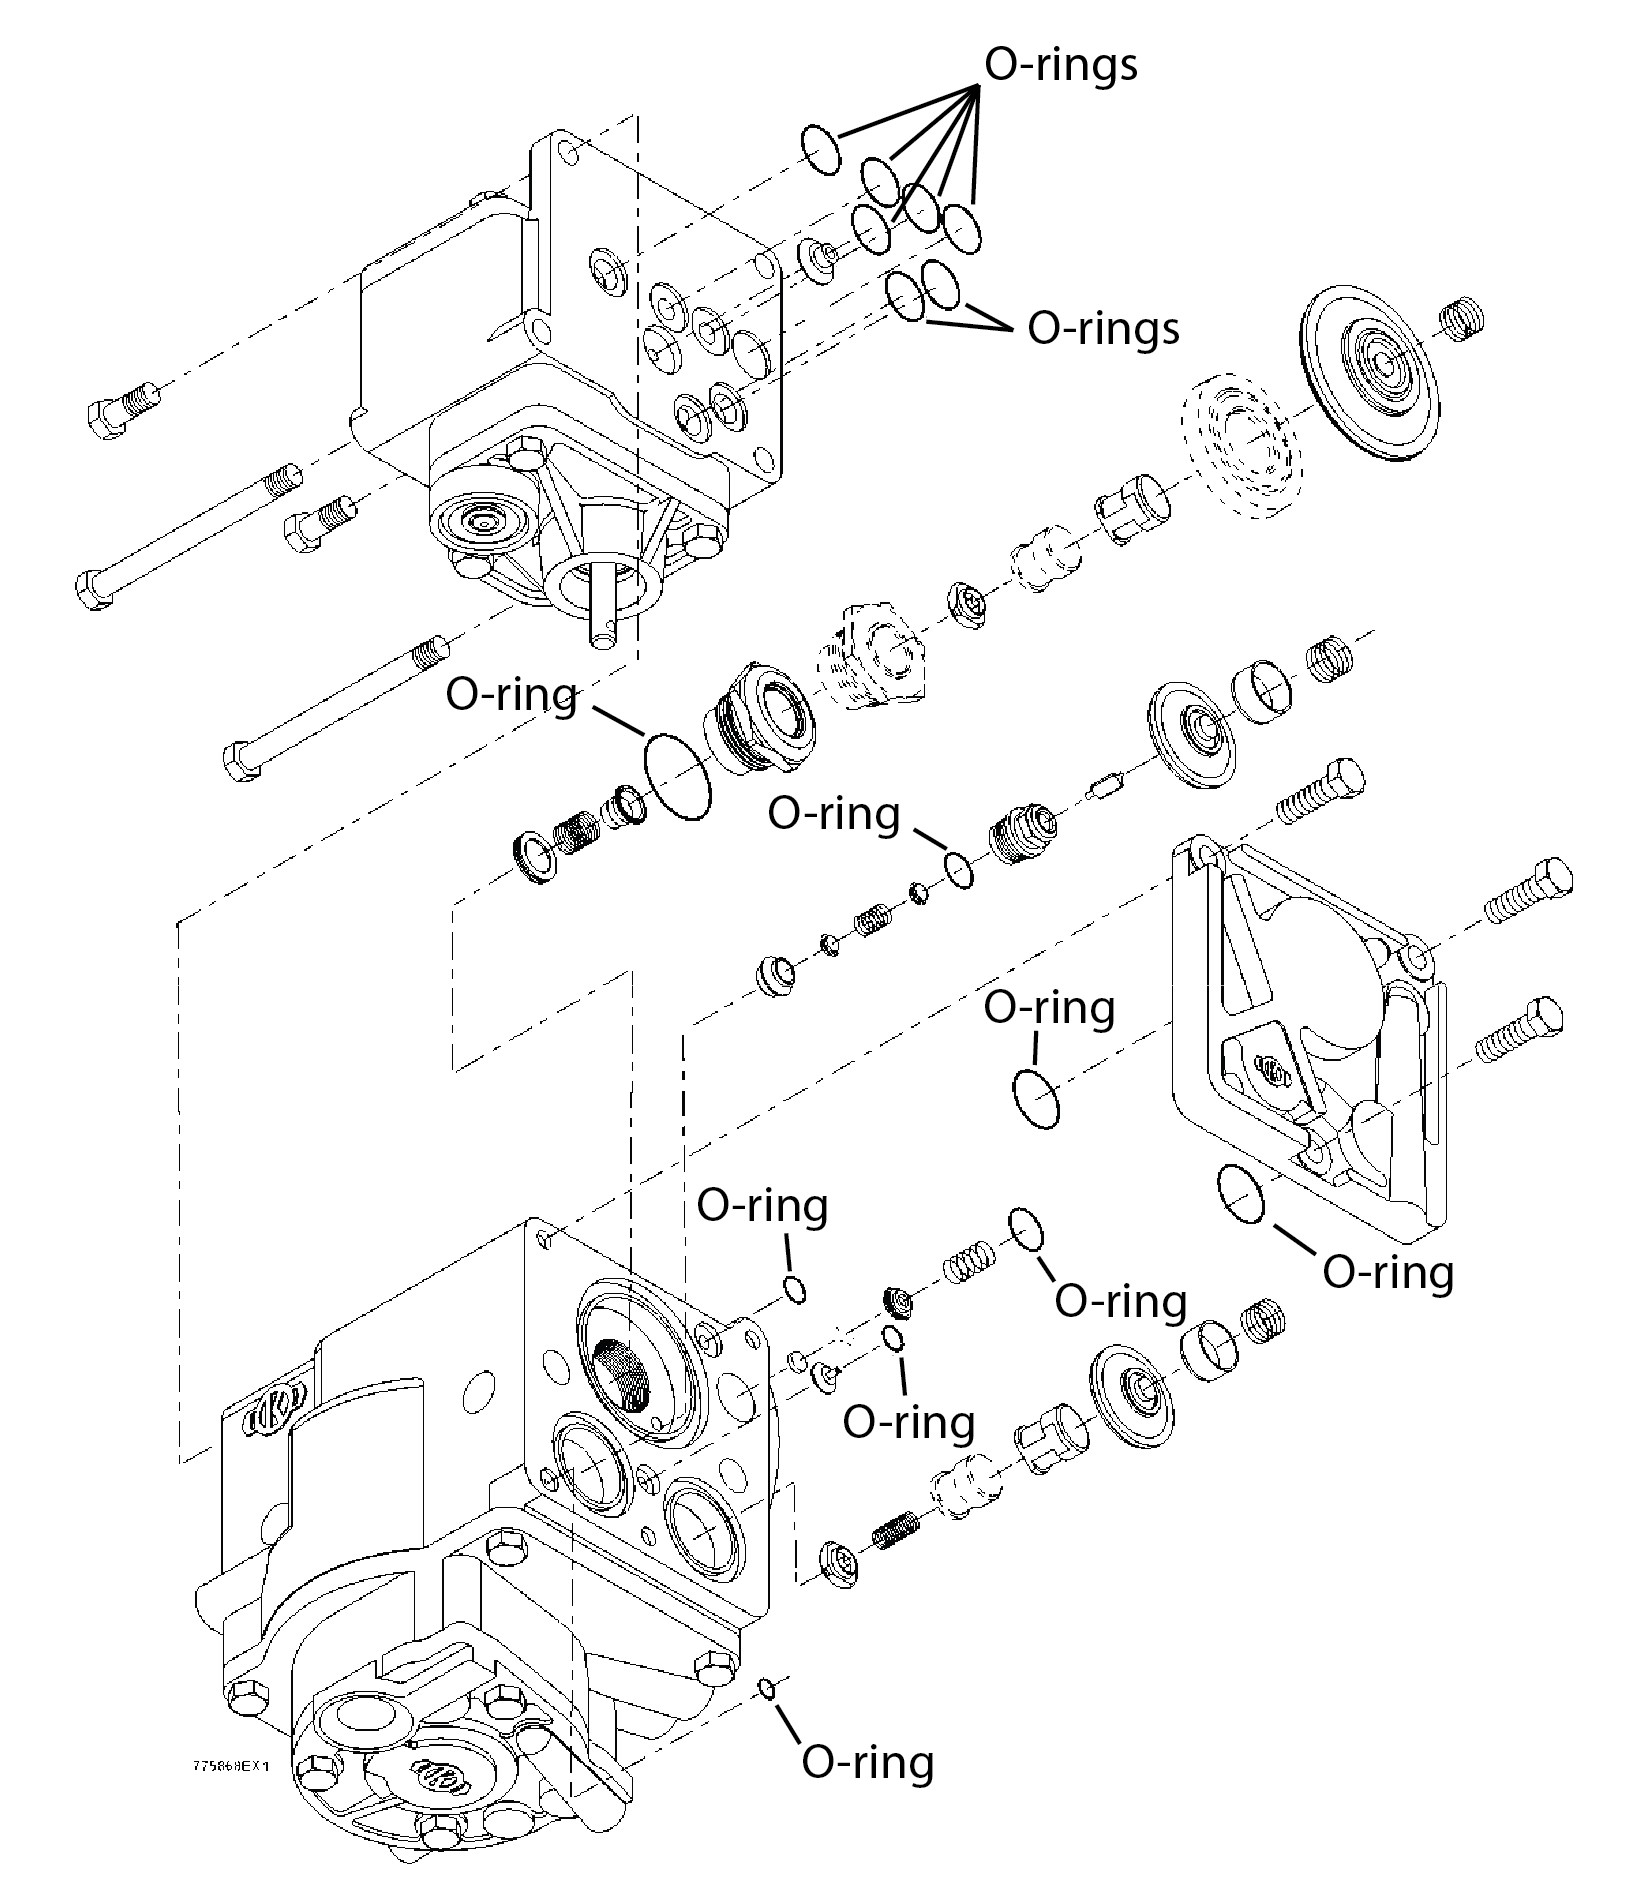 DB-10 service portion (Source: New York Air Brake, with TSB annotations)